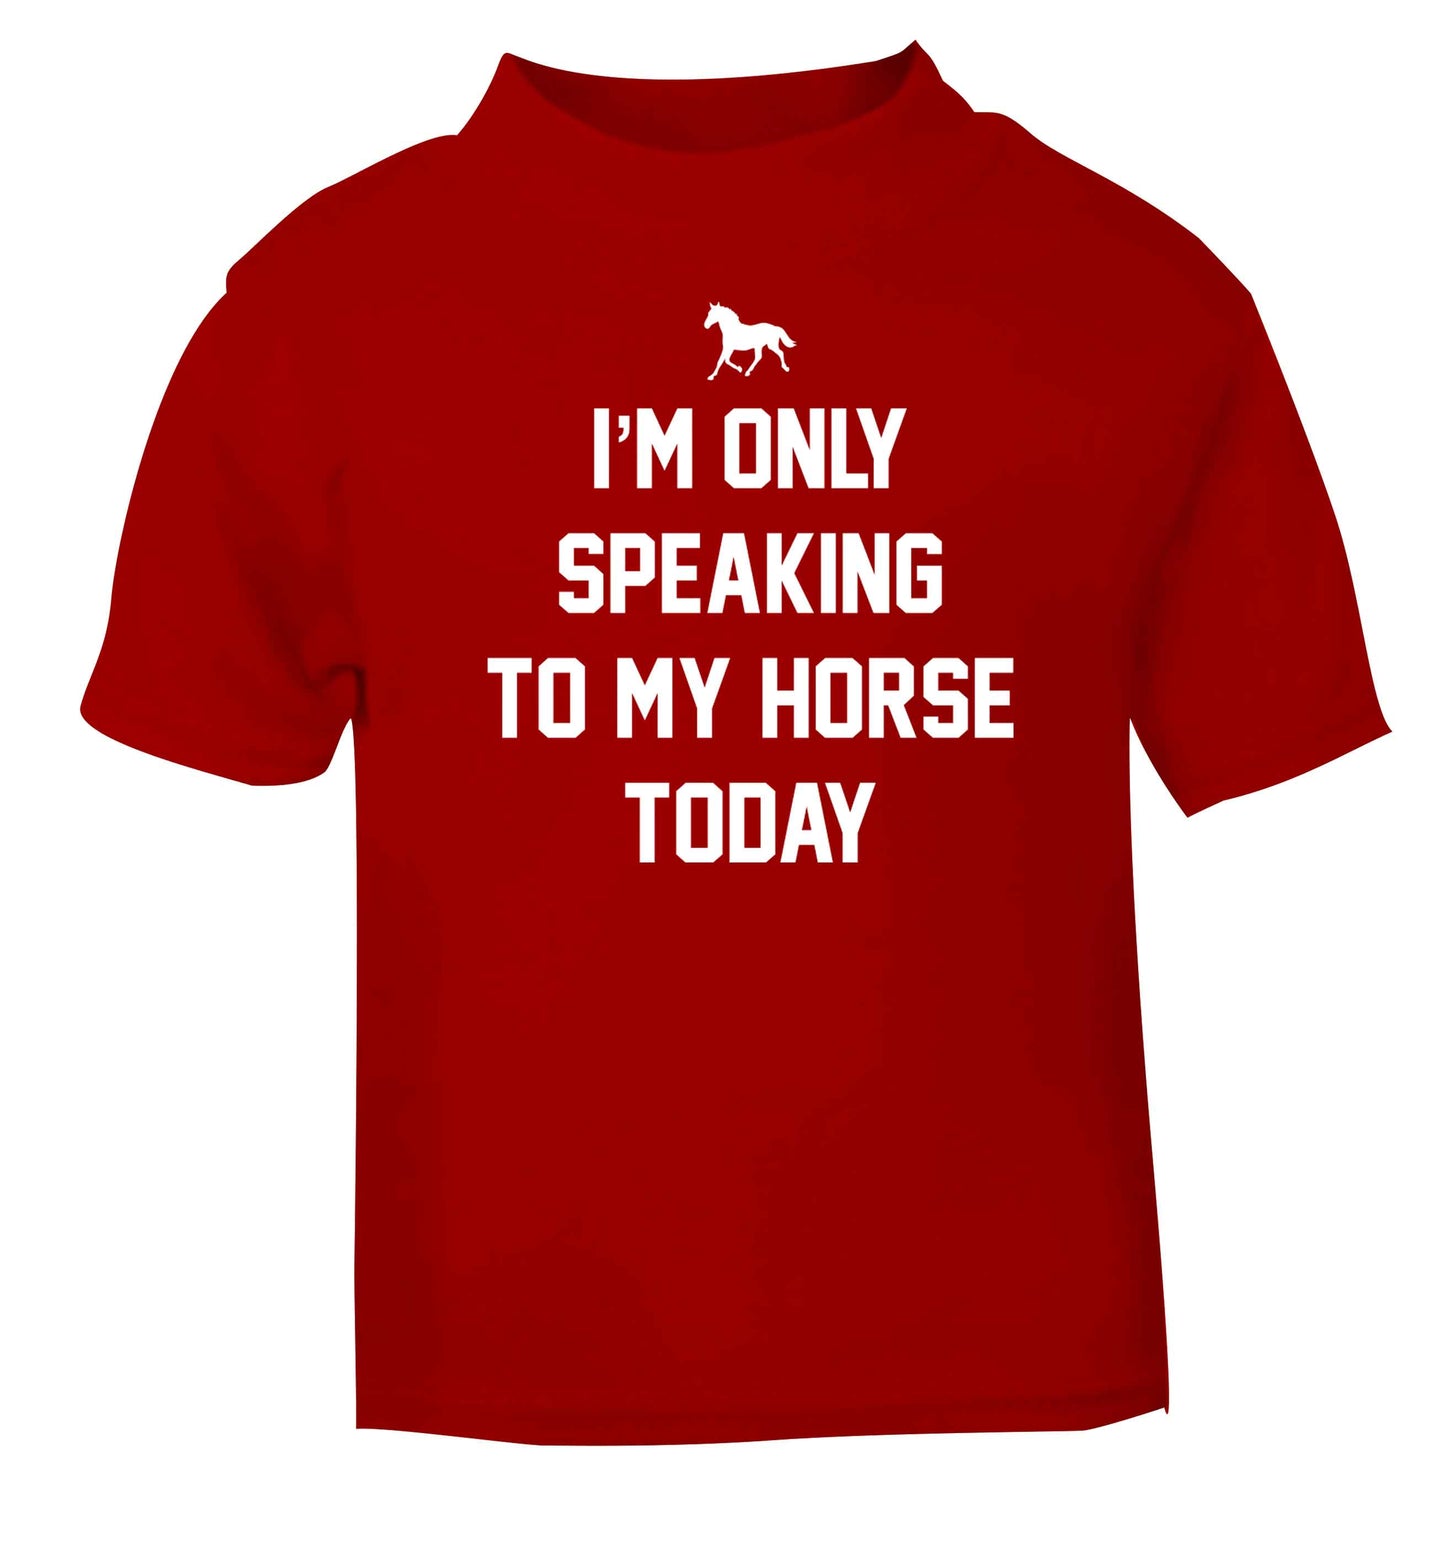 I'm only speaking to my horse today red baby toddler Tshirt 2 Years